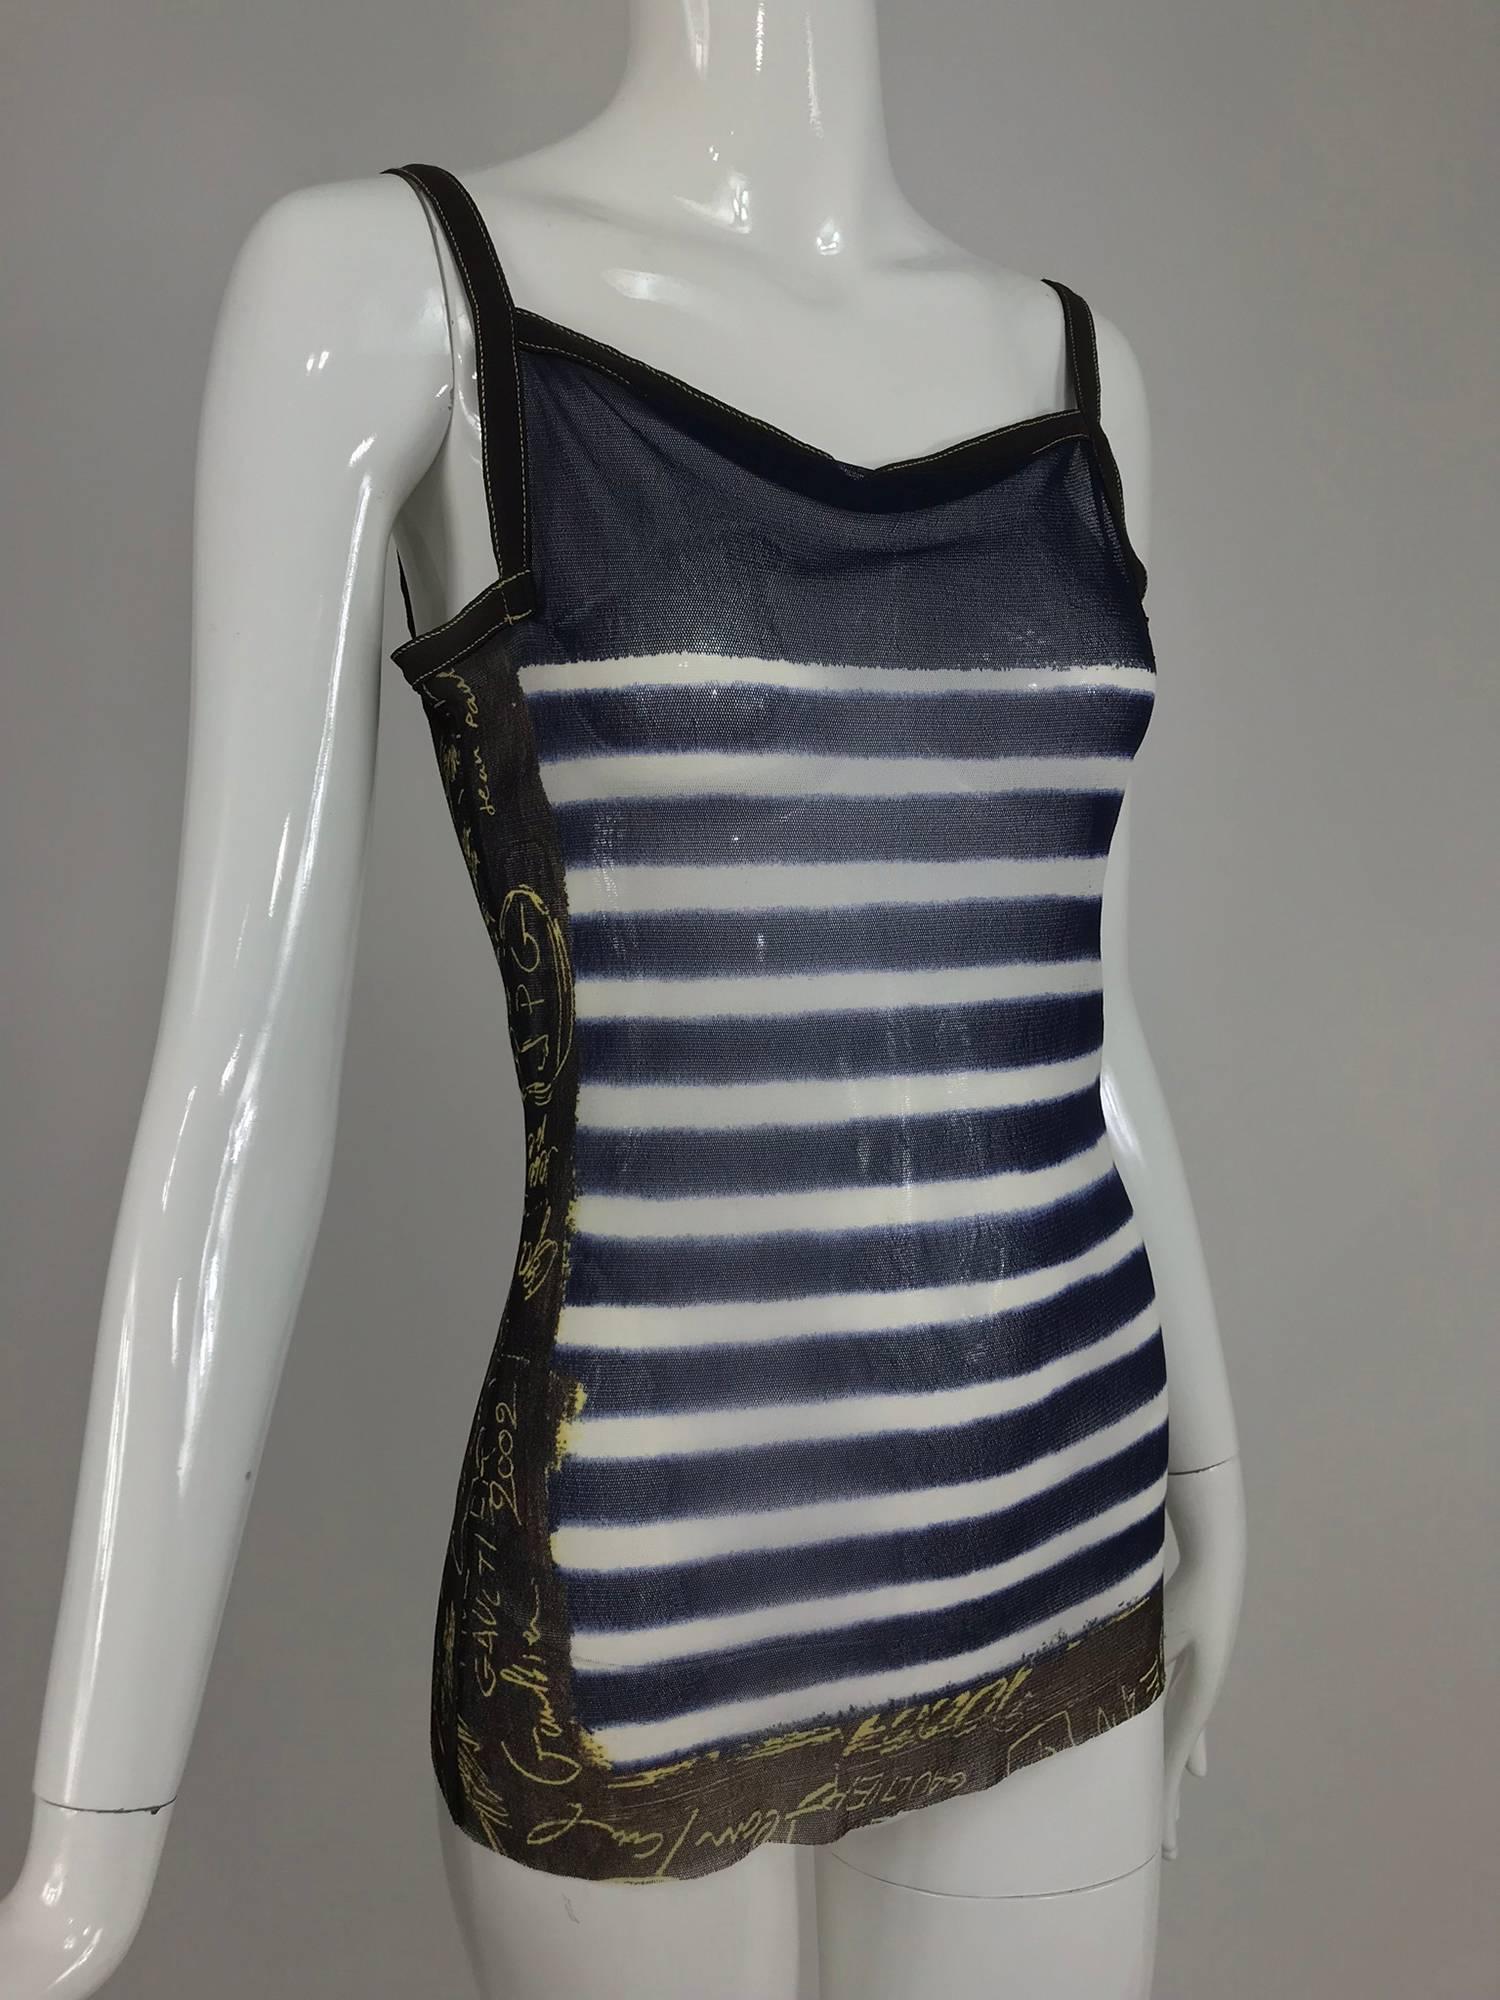 Jean Paul Gaultier nautical stripe tank top signed and dated 2001-2002. Mesh top has higher neck front and back with square shape arm openings...Blue and white stripe with vertical bands of brown and white at the sides with signed dated print.